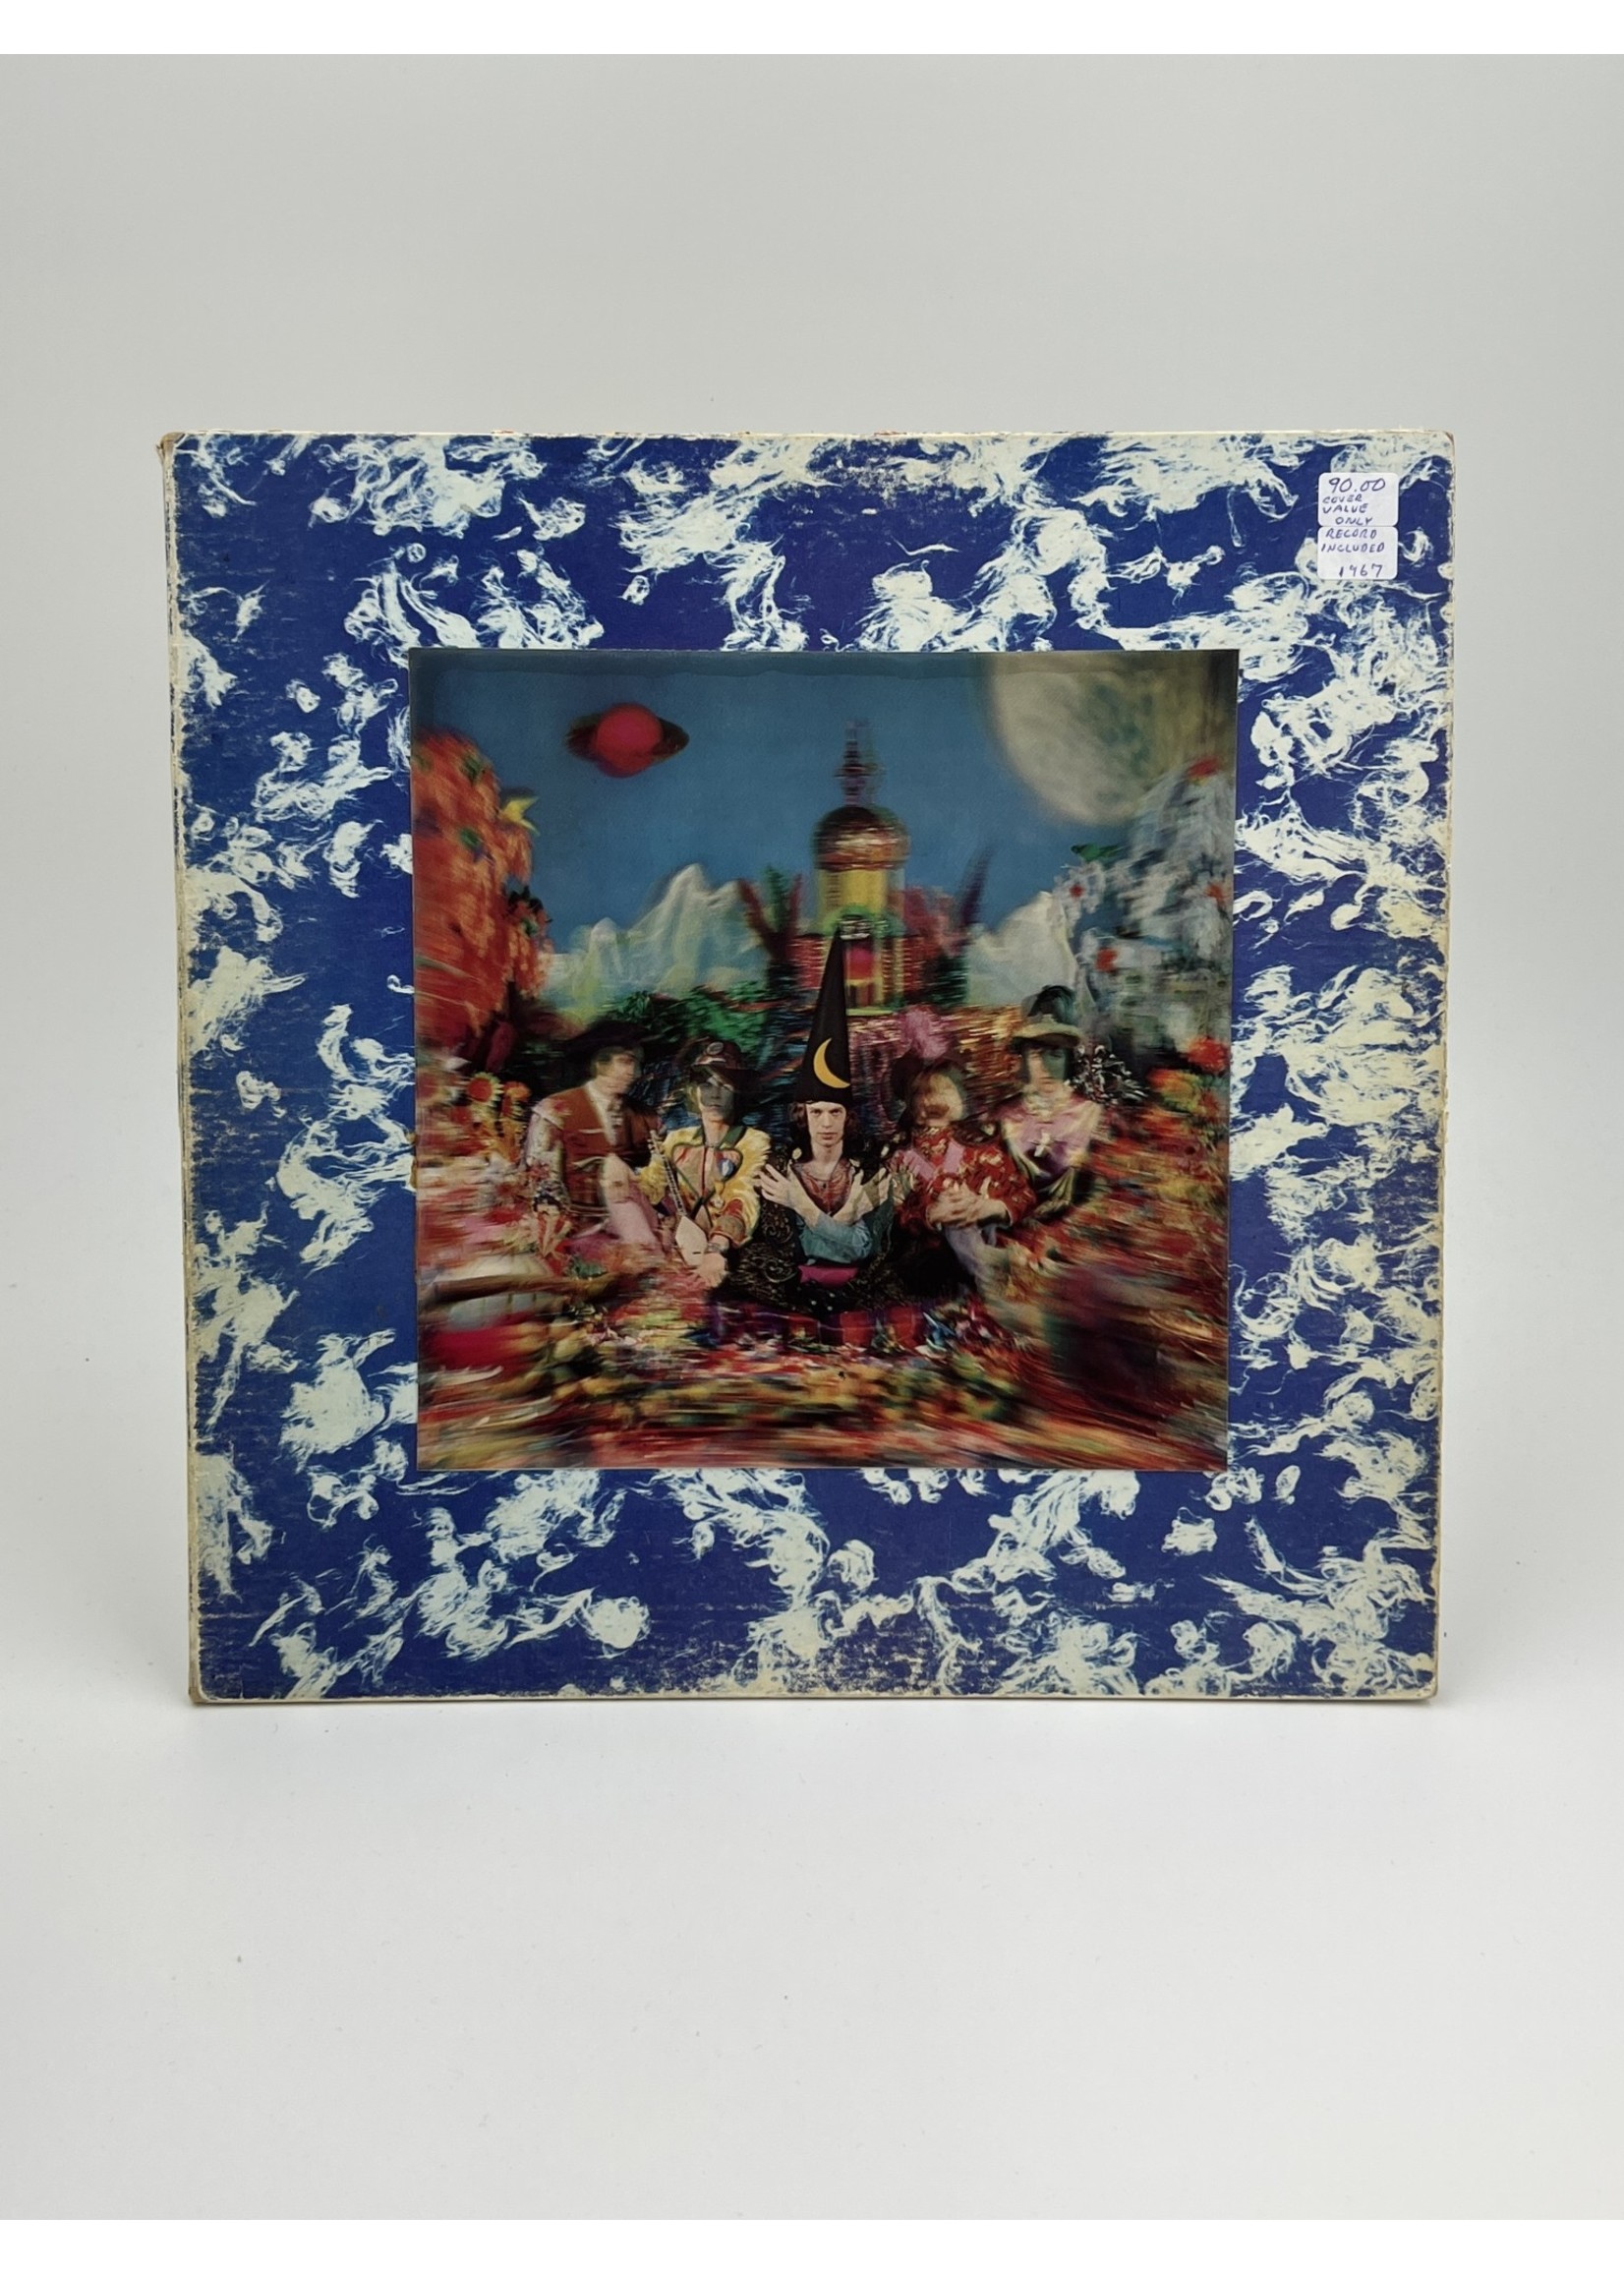 LP The Rolling Stones Their Satanic Majesties Request cover value only LP Record